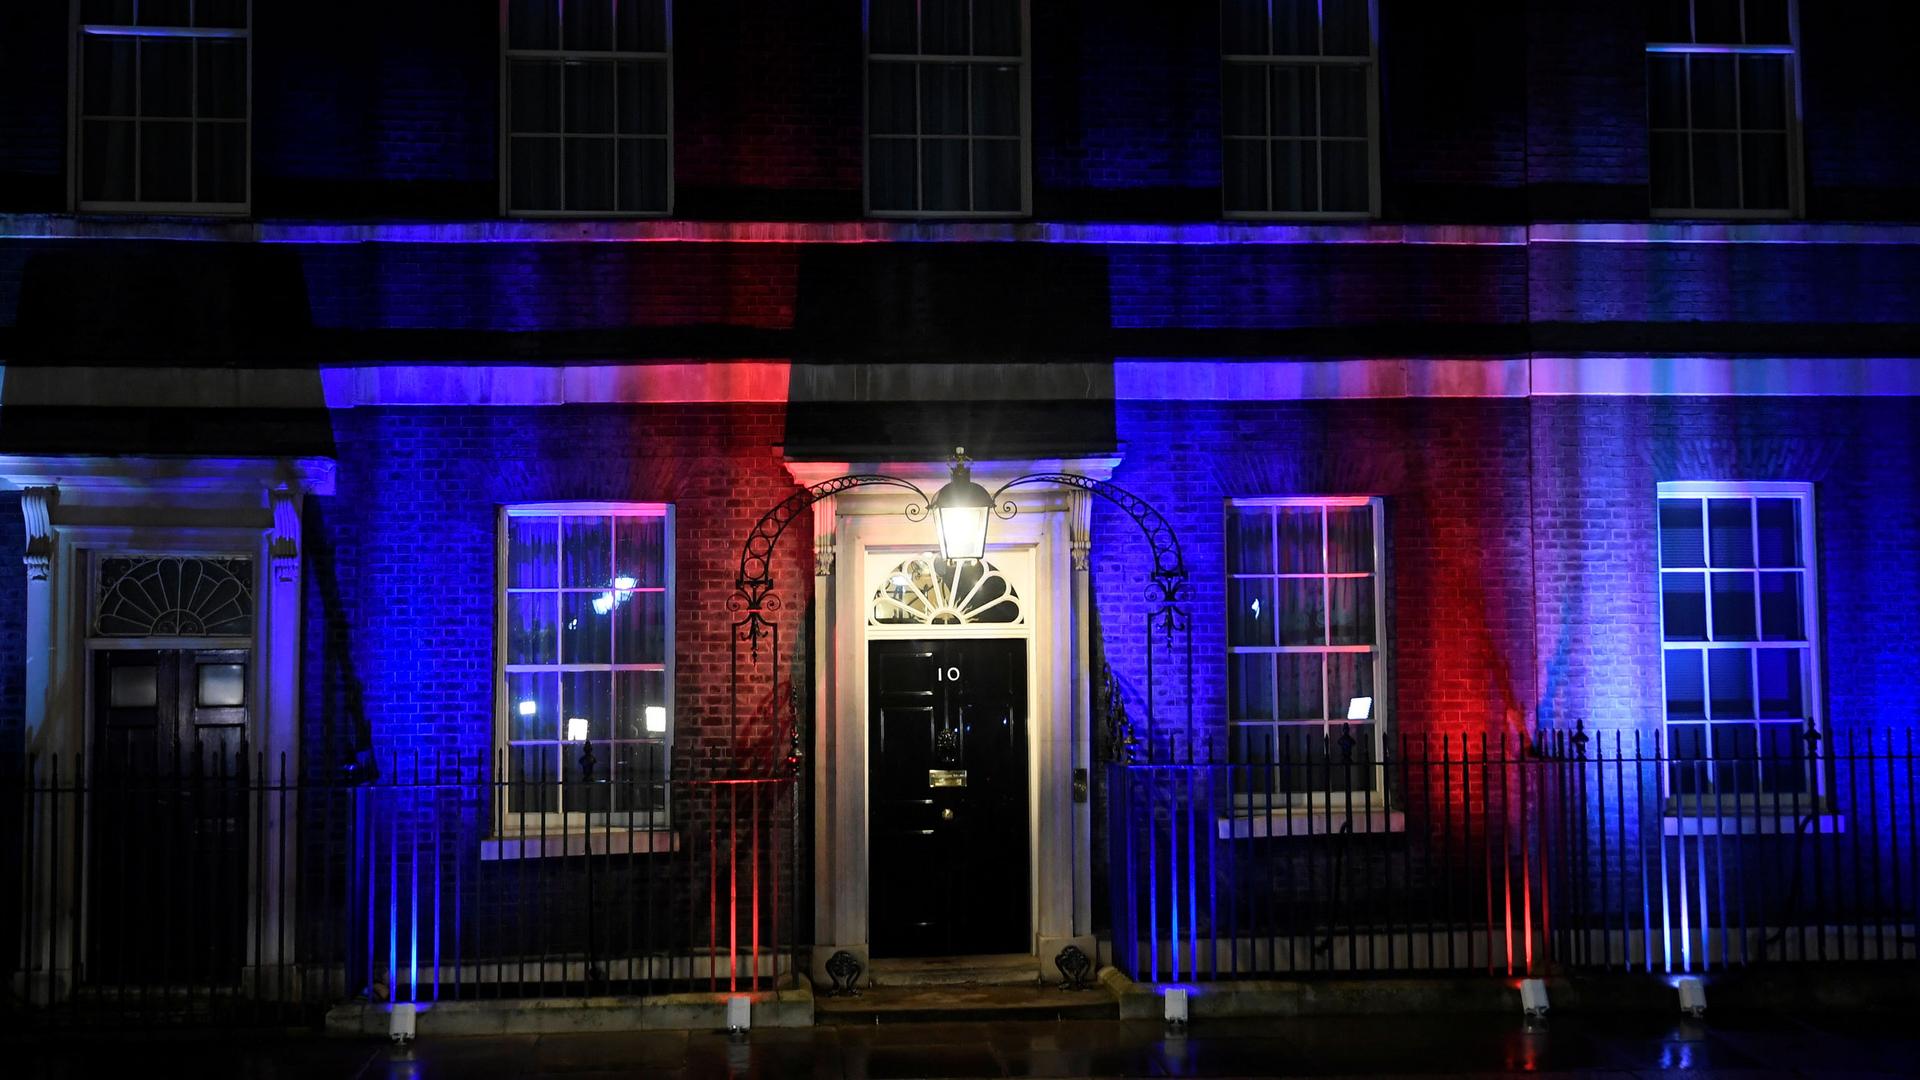 10 Downing Street is illuminated on Brexit day in London